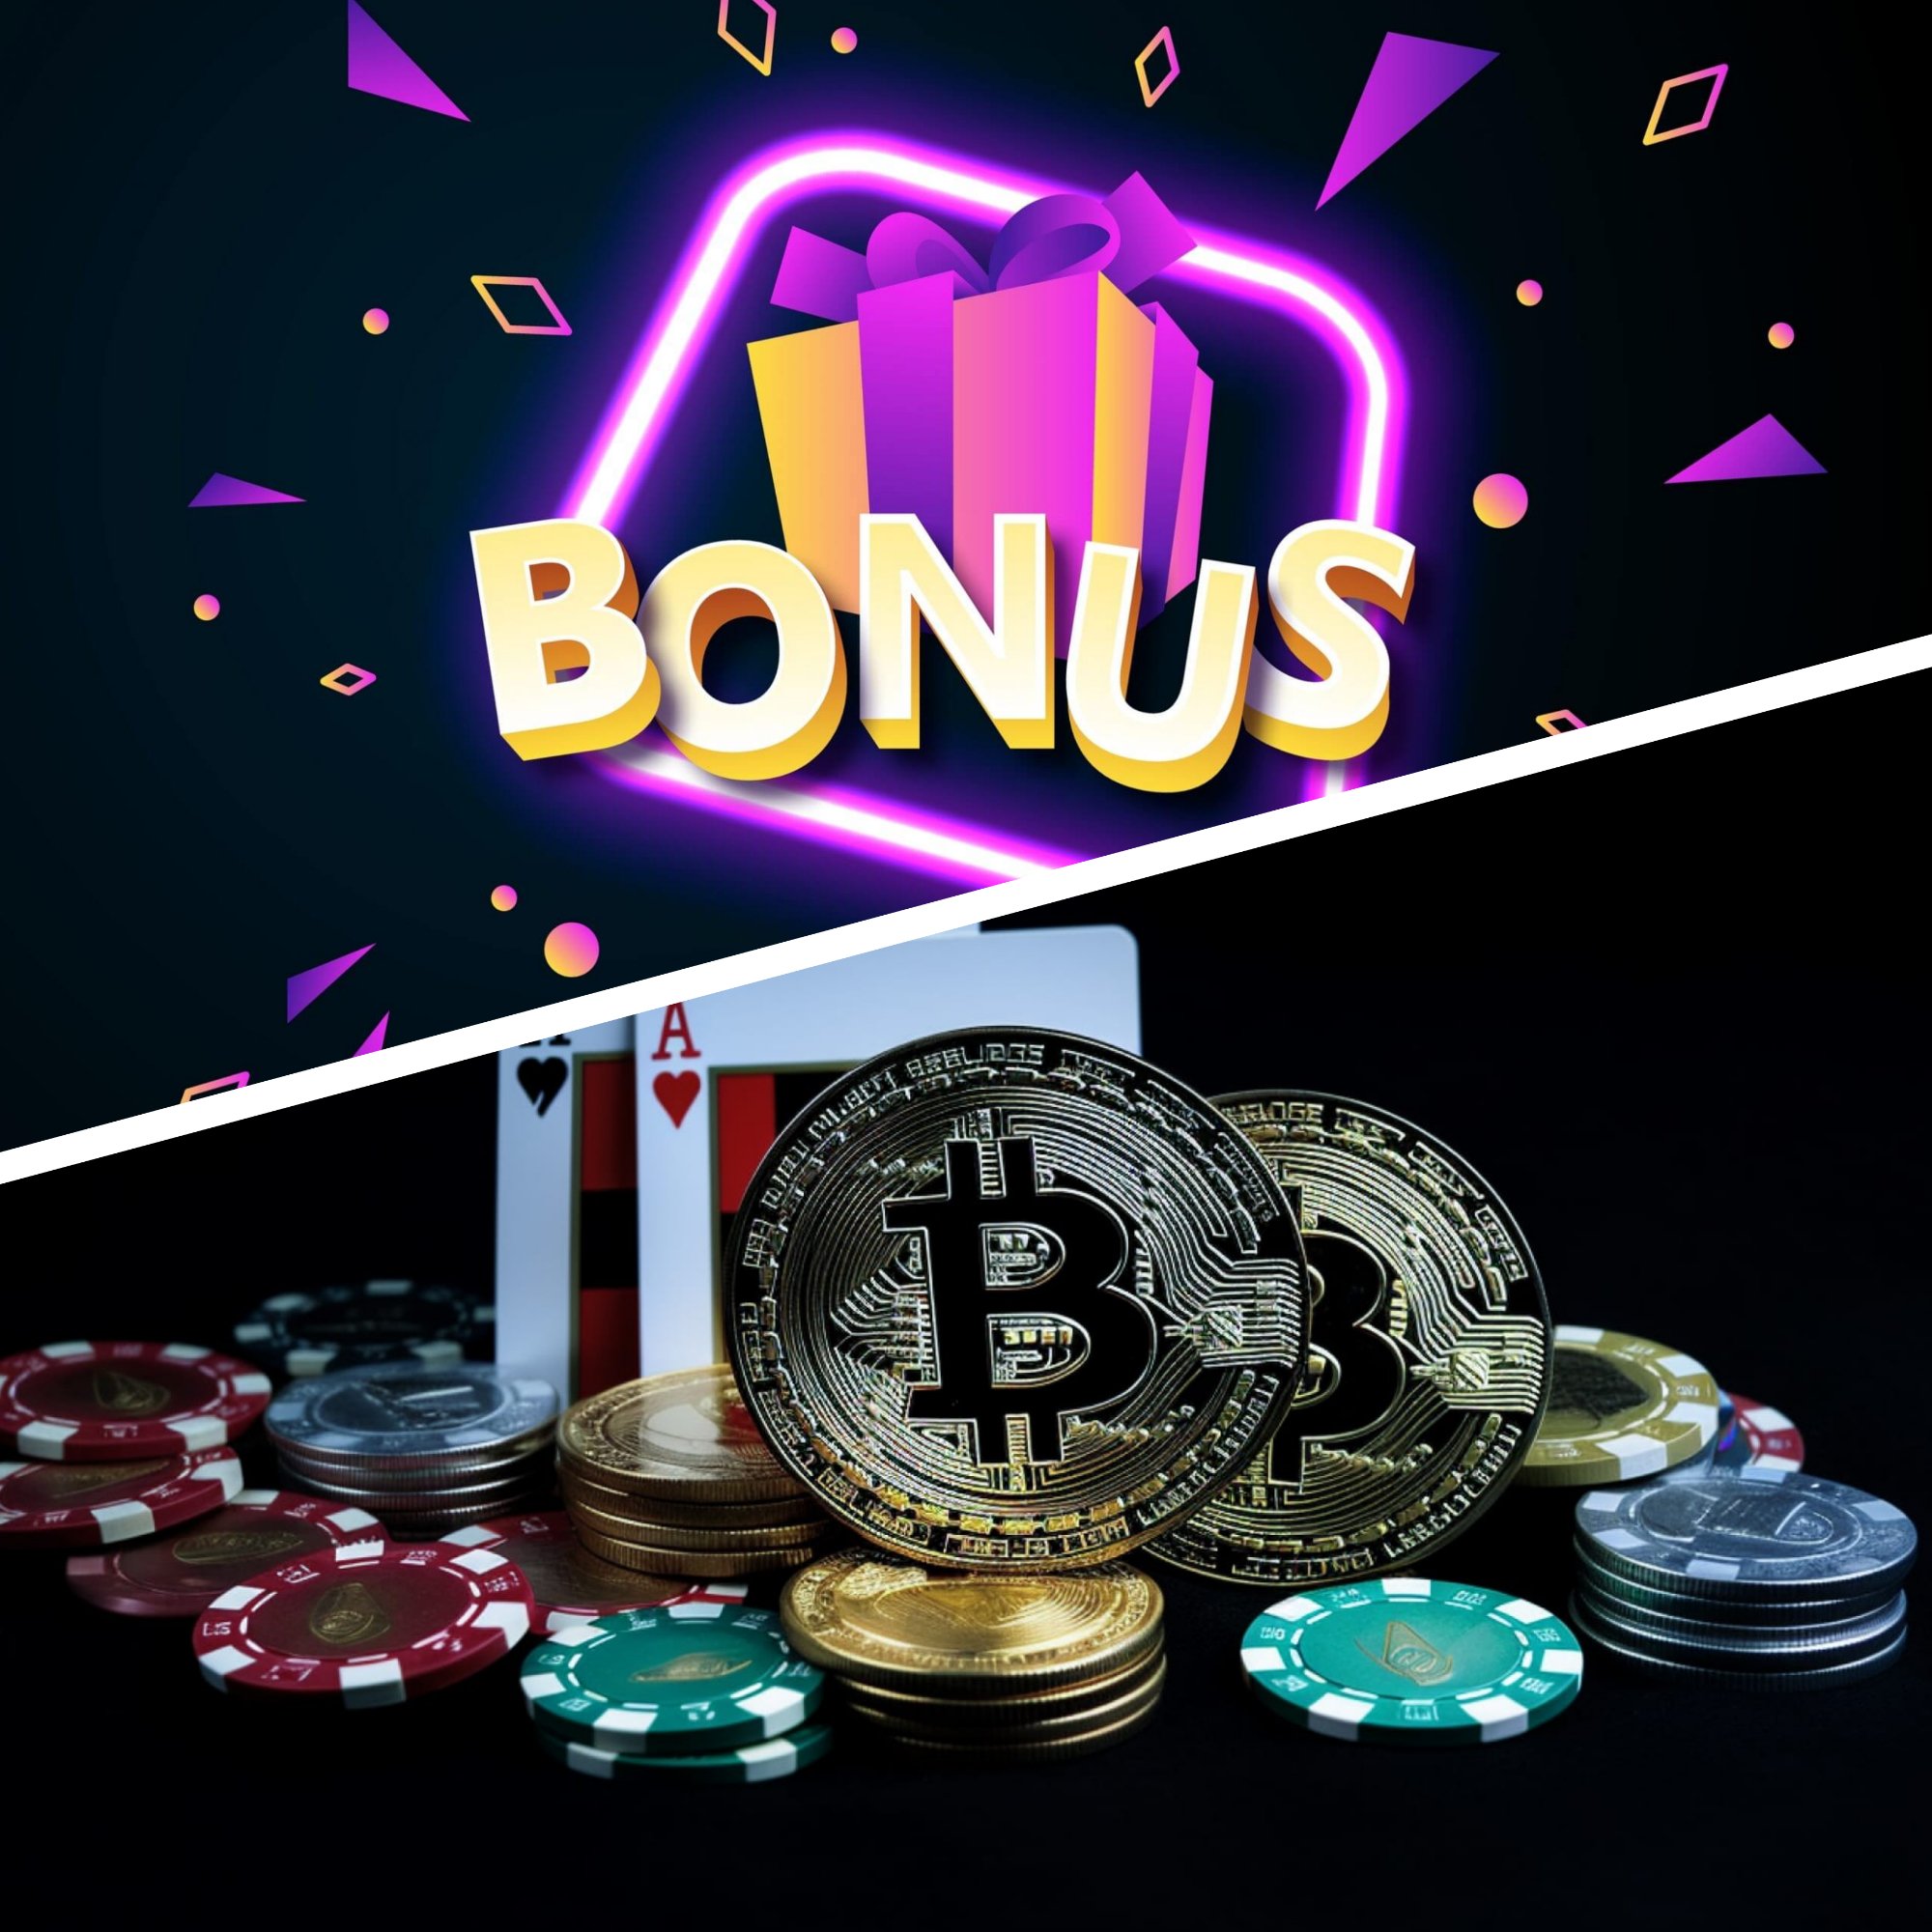 Successful bitcoin online casinos: Learning from the Pros